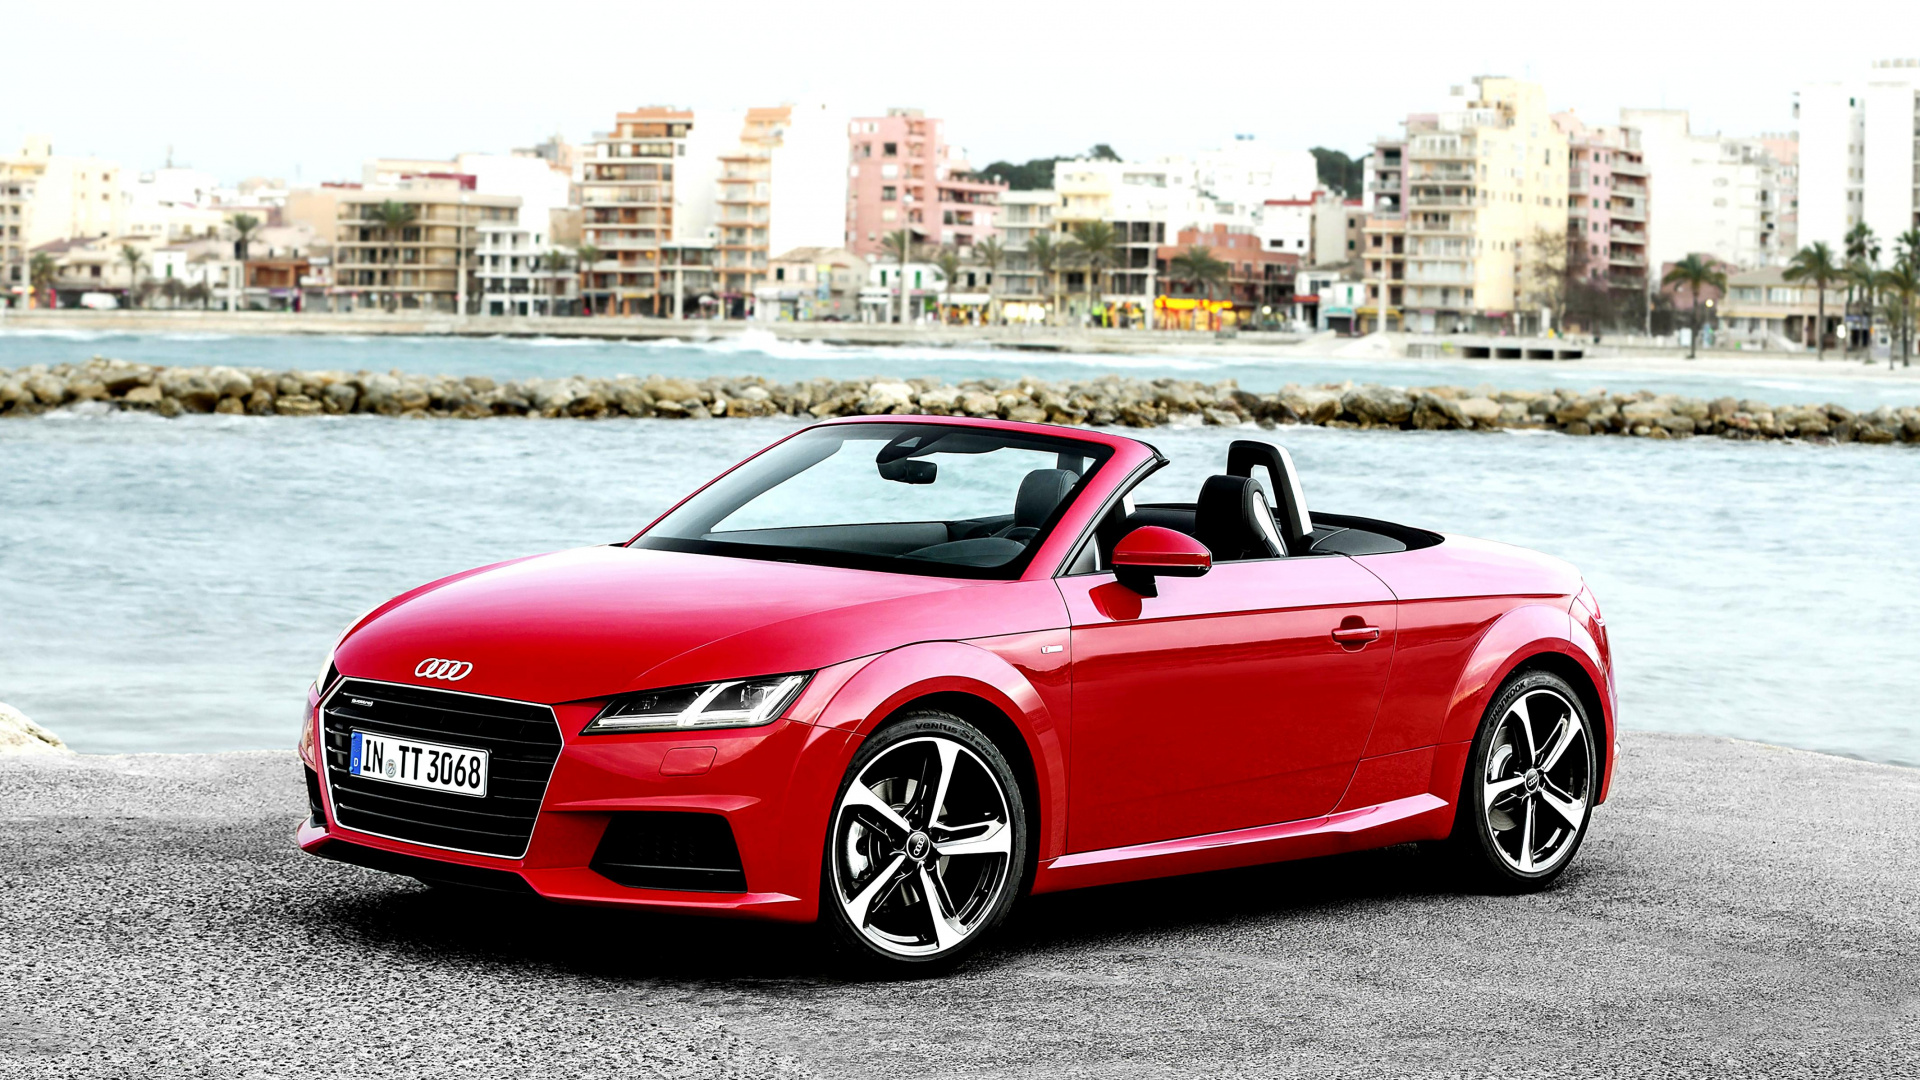 Red Convertible Car Parked Near Body of Water During Daytime. Wallpaper in 1920x1080 Resolution